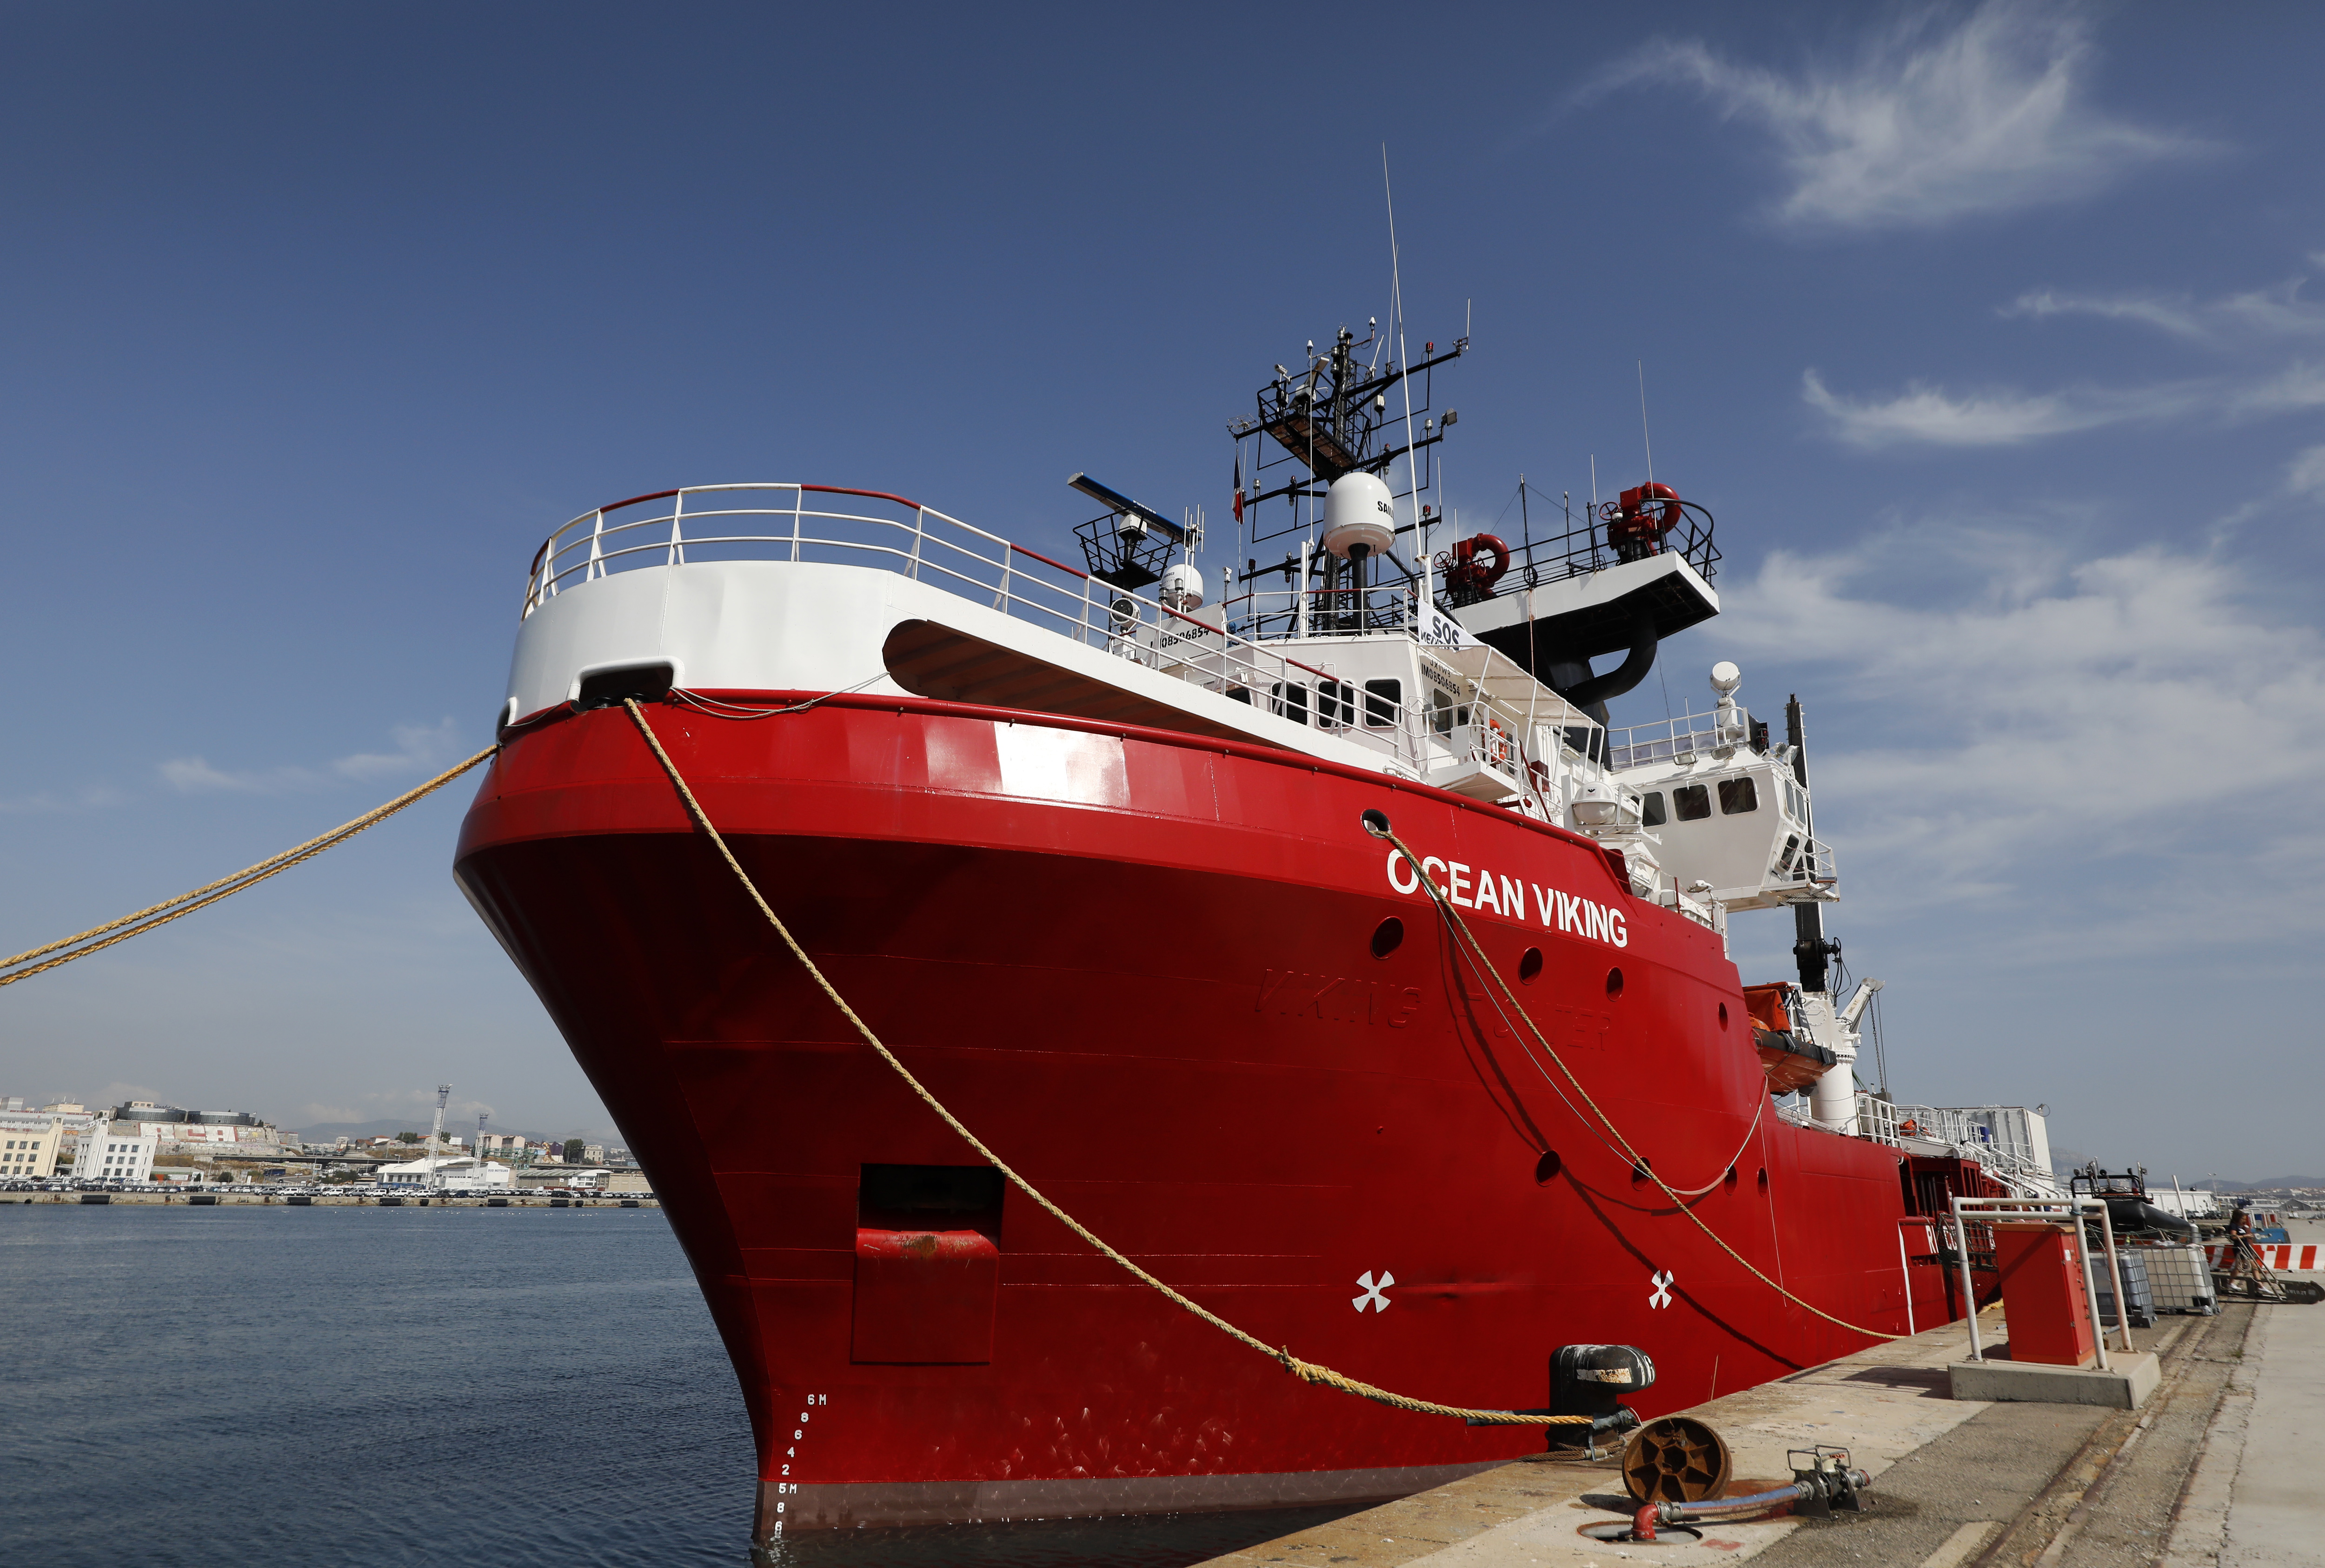 epa07752341 The new rescue vessel 'Ocean Viking' of the French NGO SOS Mediterranee and Doctors Without Borders is moored in the port of Marseille, France, 01 August 2019.  EPA/SEBASTIEN NOGIER